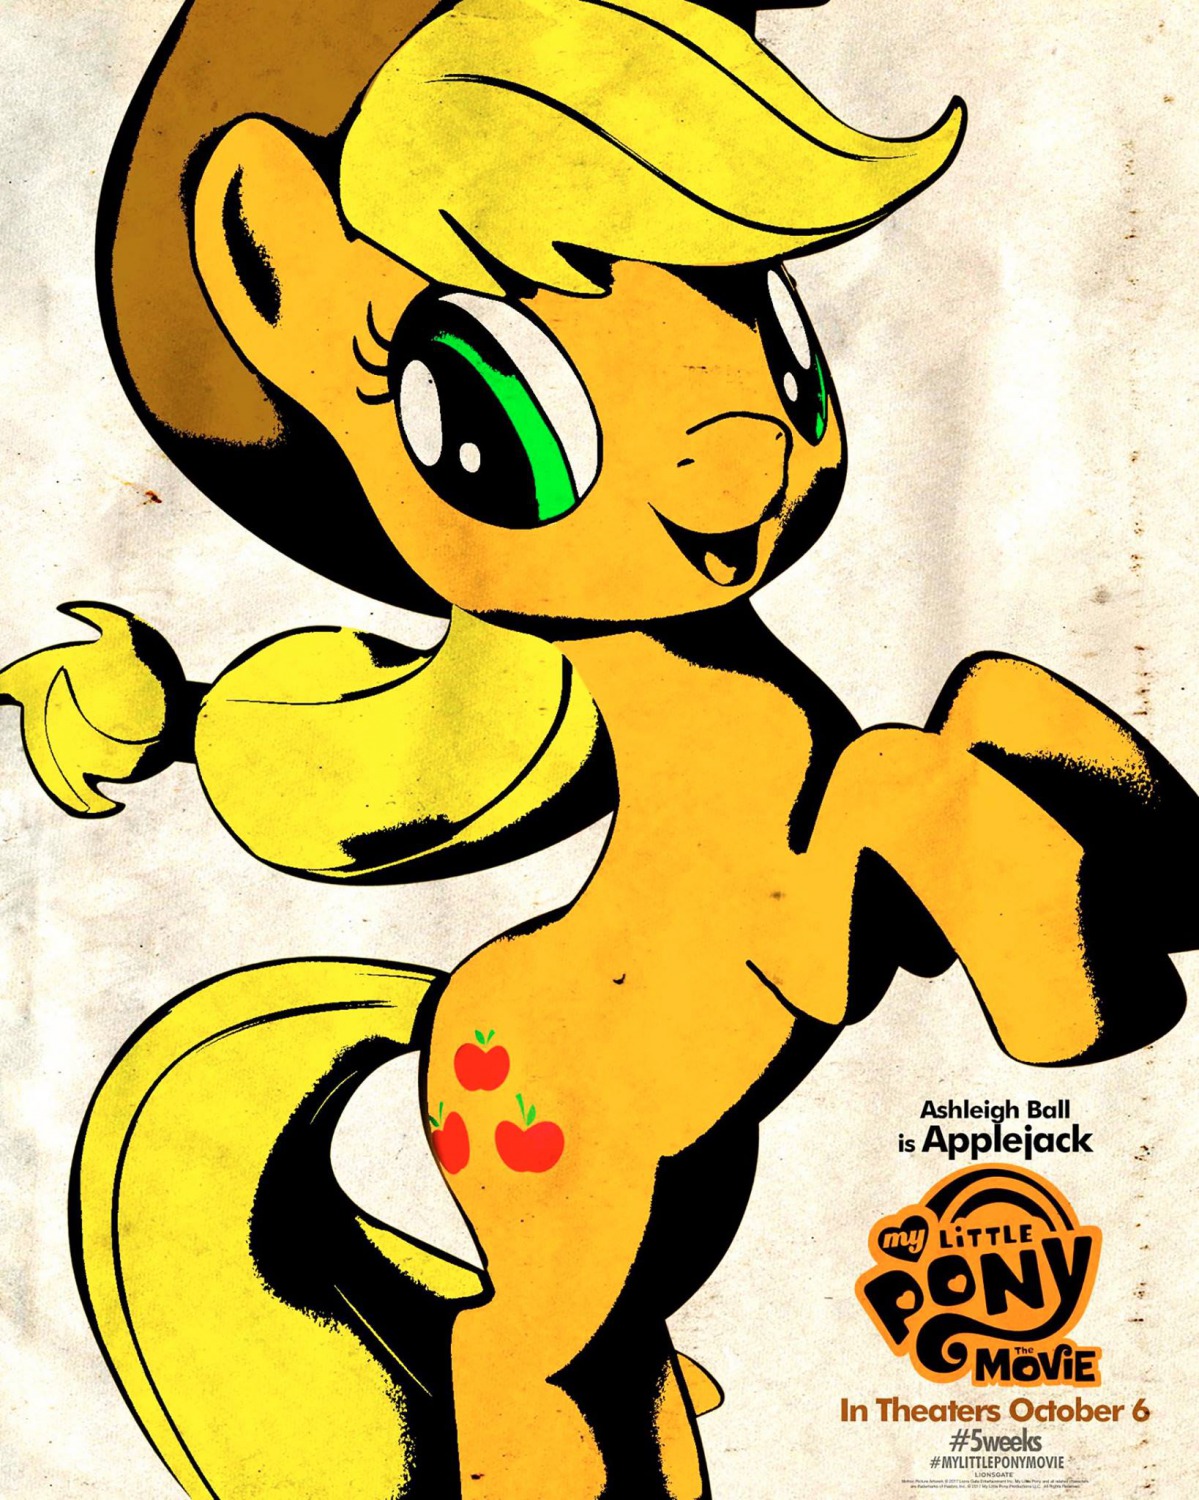 Extra Large Movie Poster Image for My Little Pony: The Movie (#24 of 55)